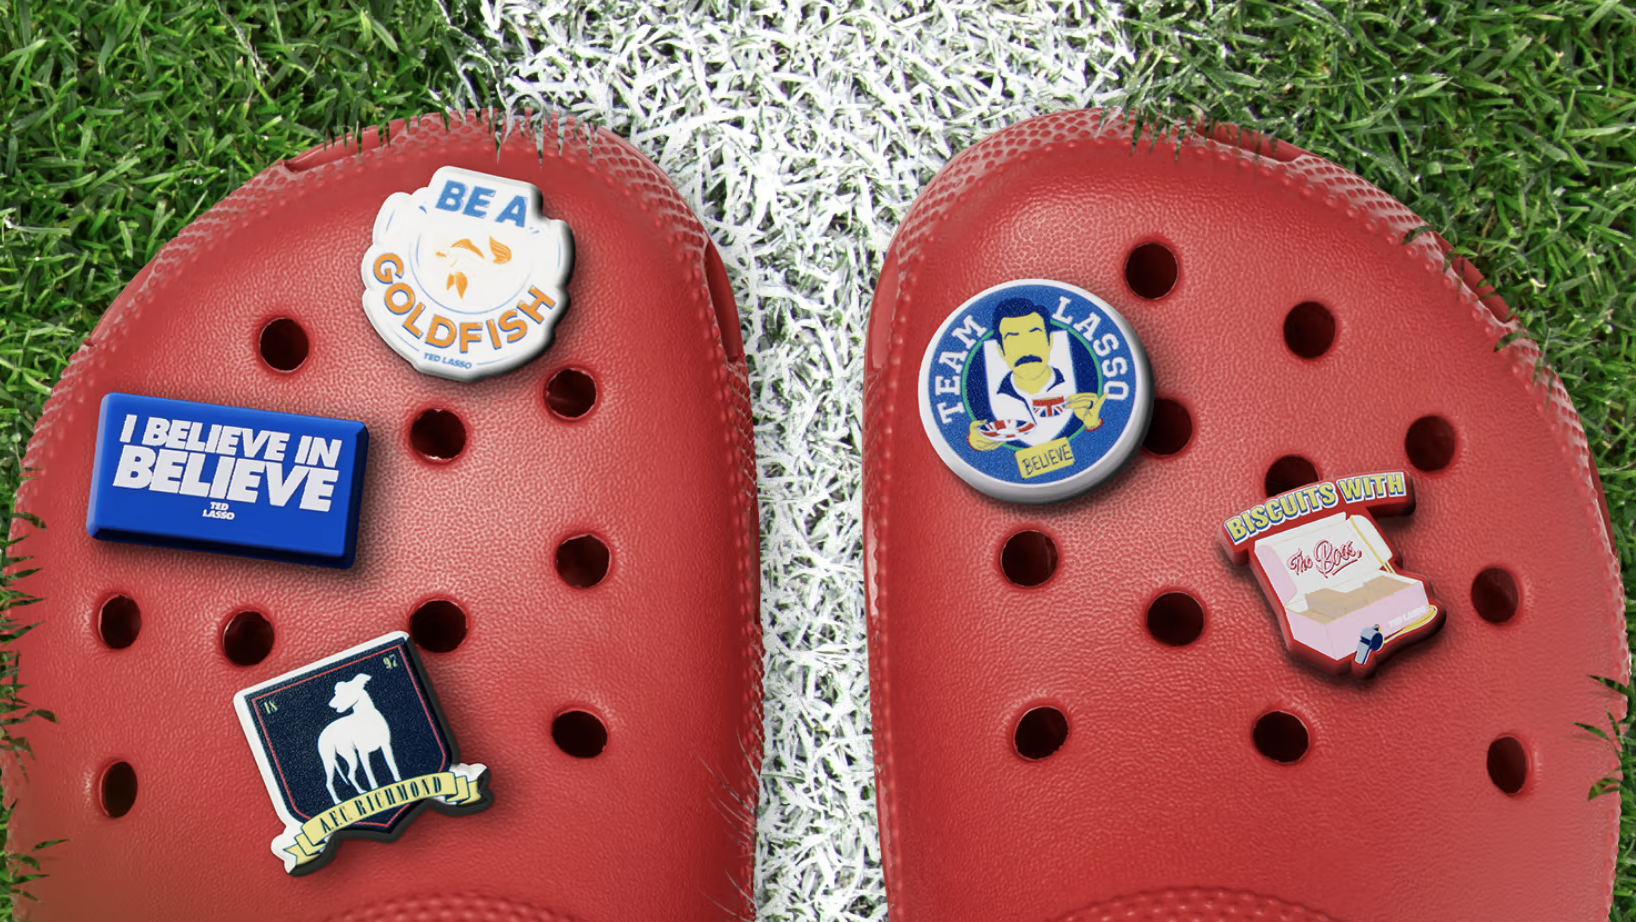 This Ted Lasso Crocs collection will make you want to believe